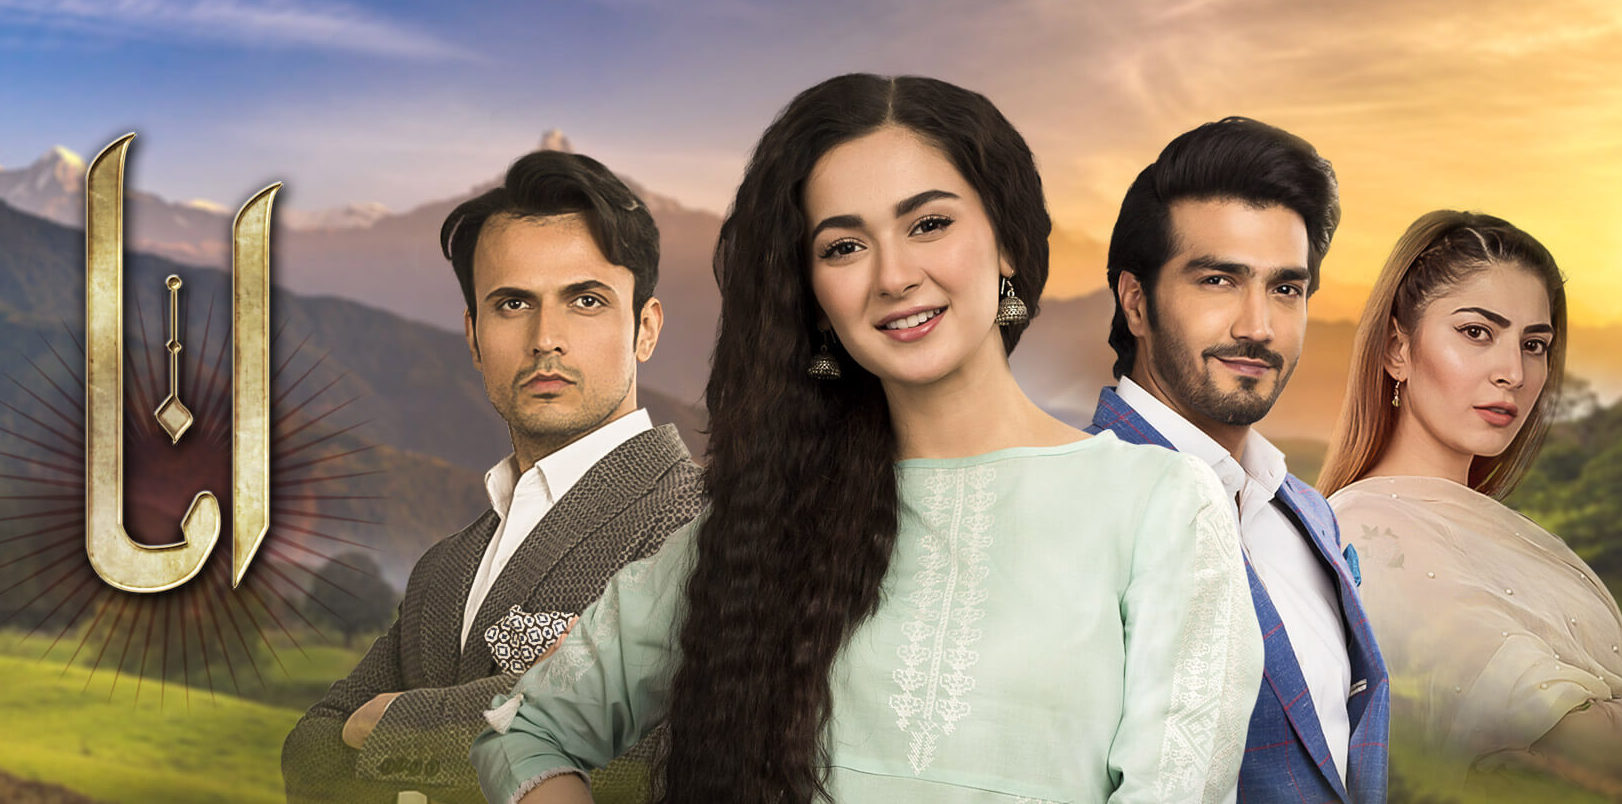 Anaa,' a light-hearted drama serial with twisted family dynamics